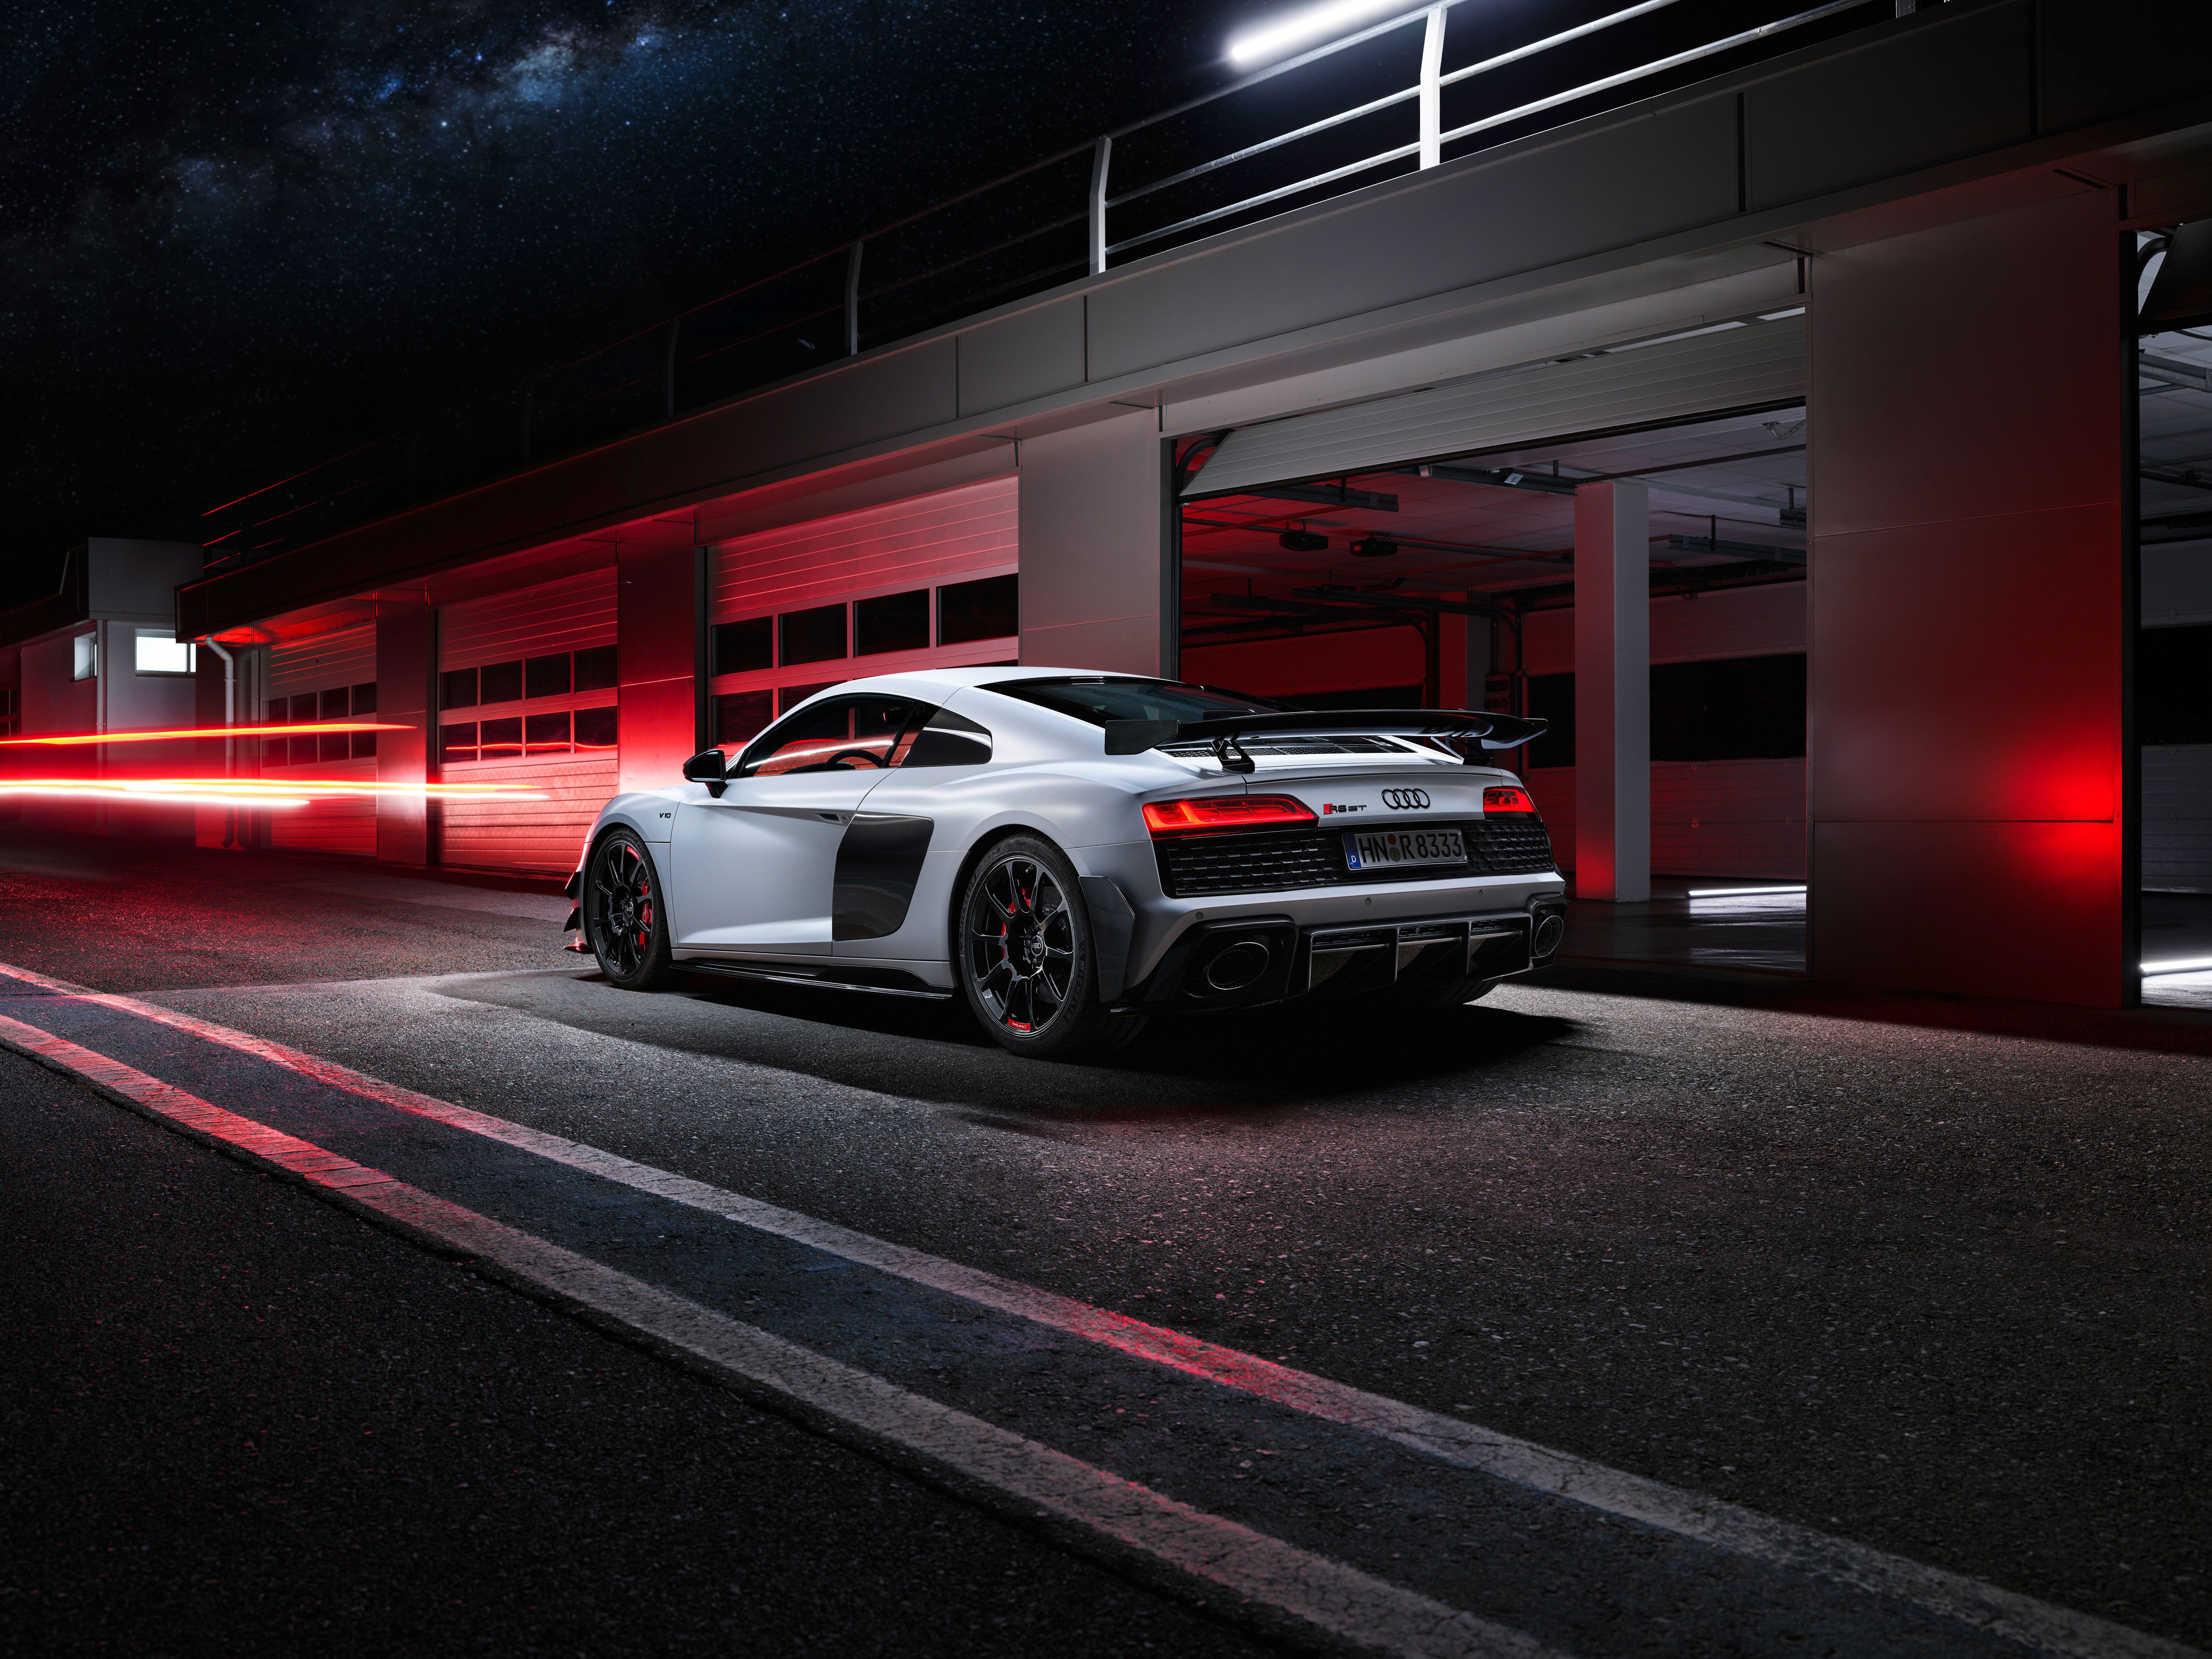 2022 Audi R8 Performance RWD Spyder: Last Drive in the Supercar